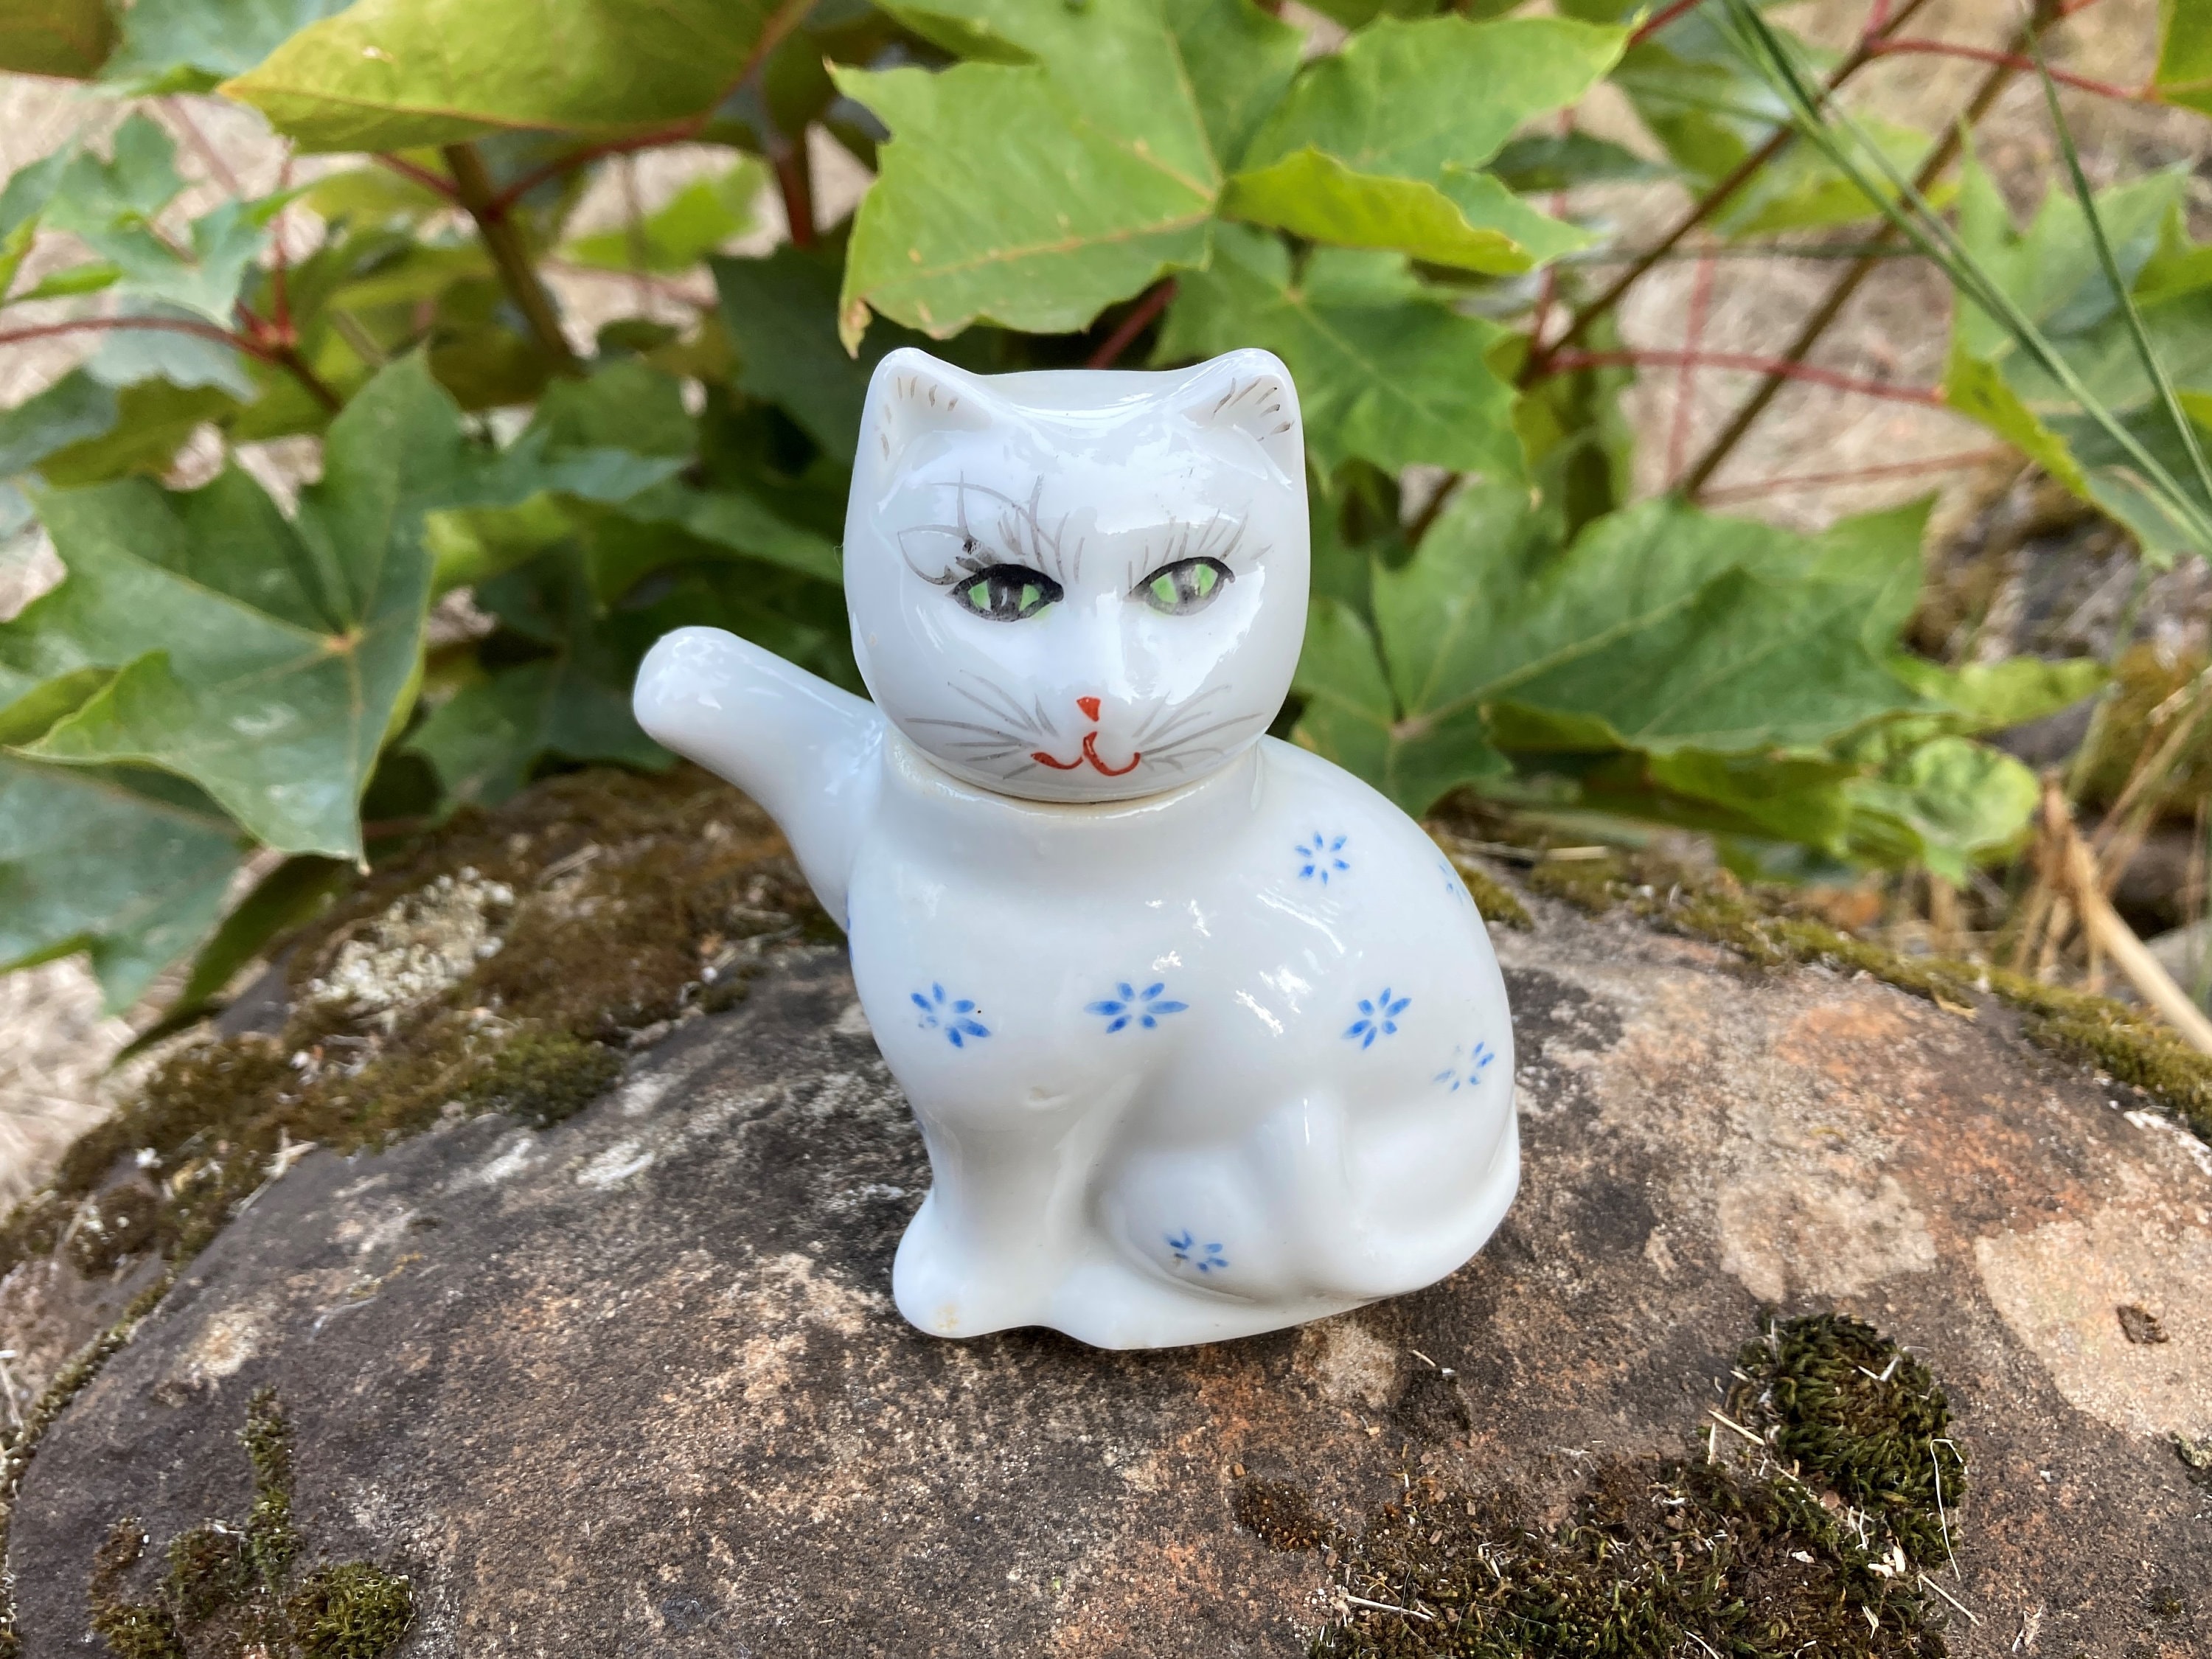 Elegant And Fun Cat Teapots For People Who Love Kitties! – Meow As Fluff